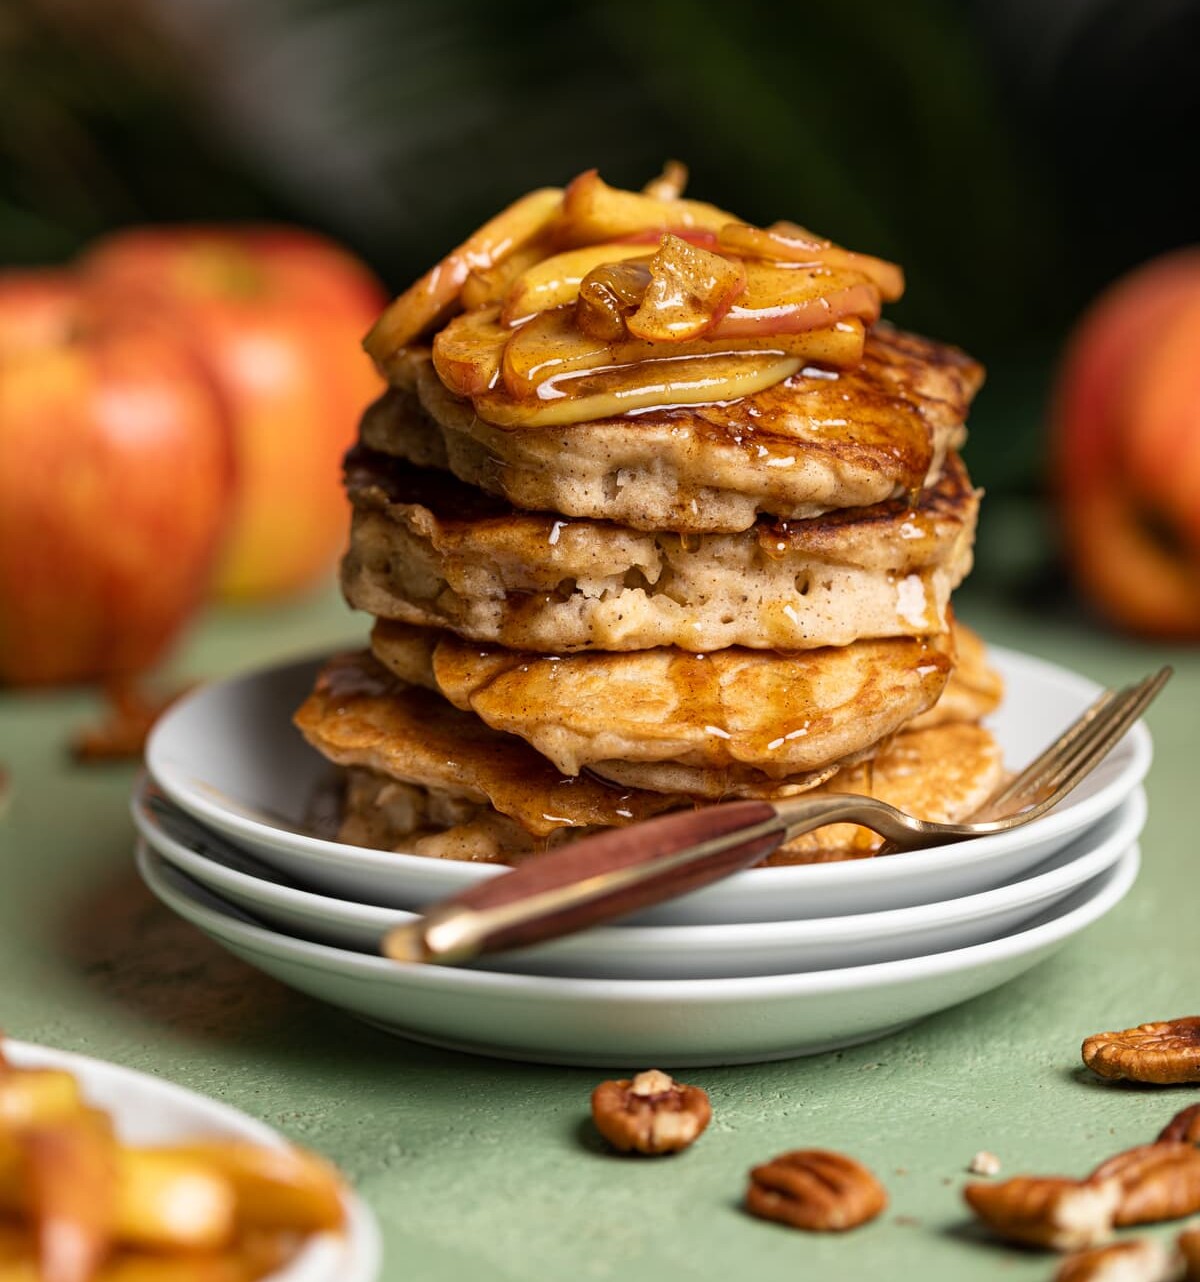 Stack of Vegan Apple Cinnamon Pancakes topped with caramelized apples and maple syrup